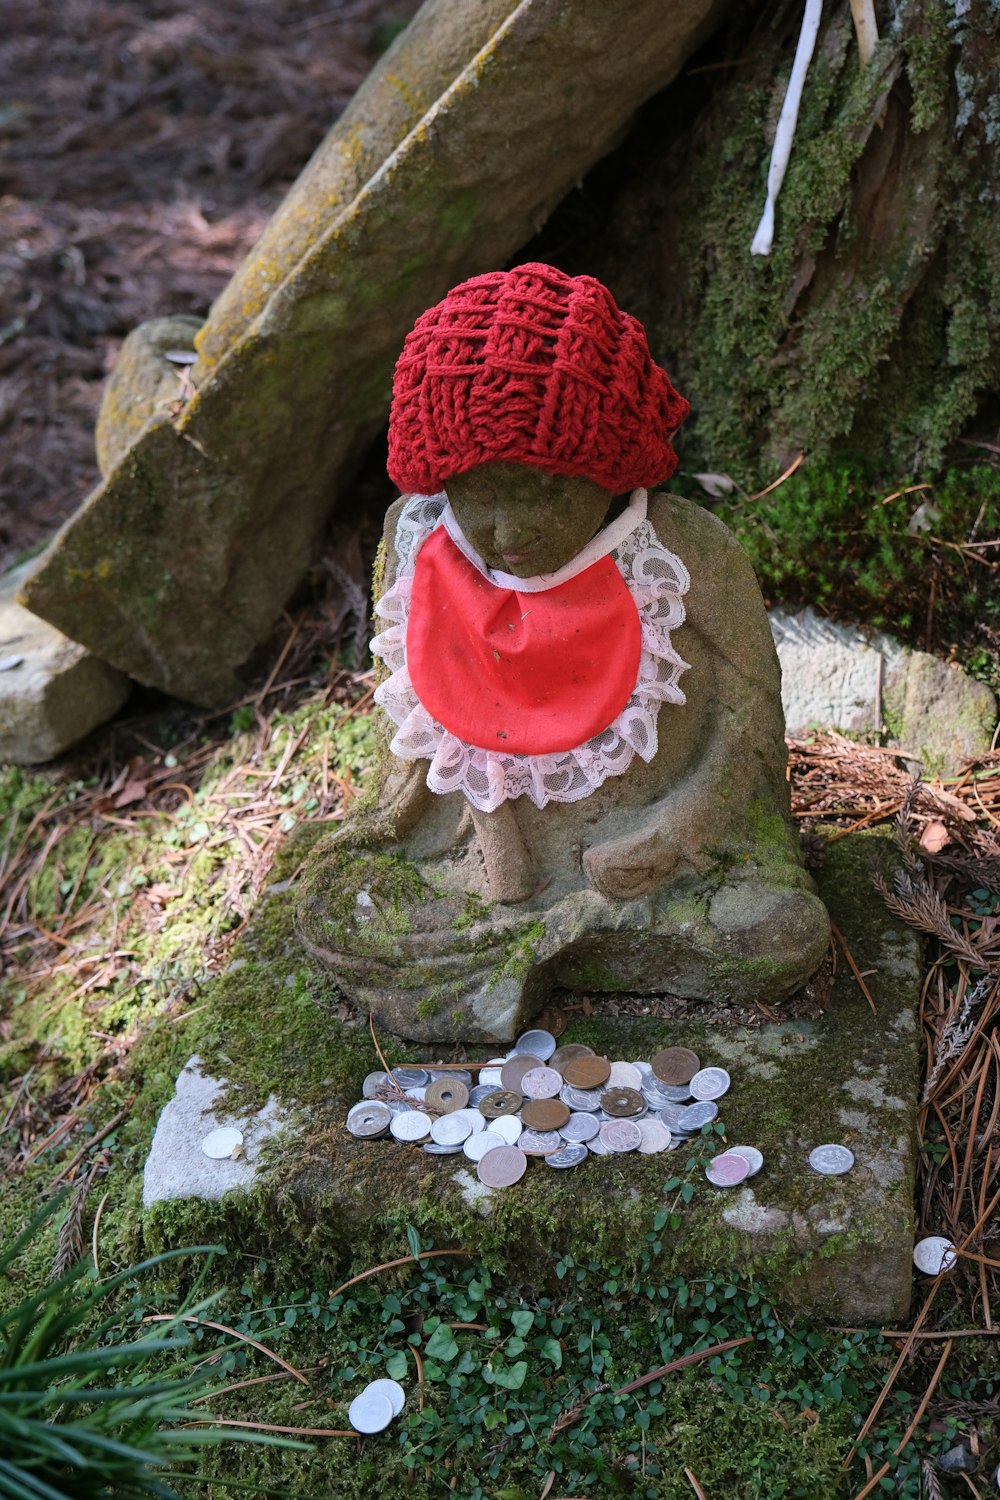 a statue of a little girl with a red hat